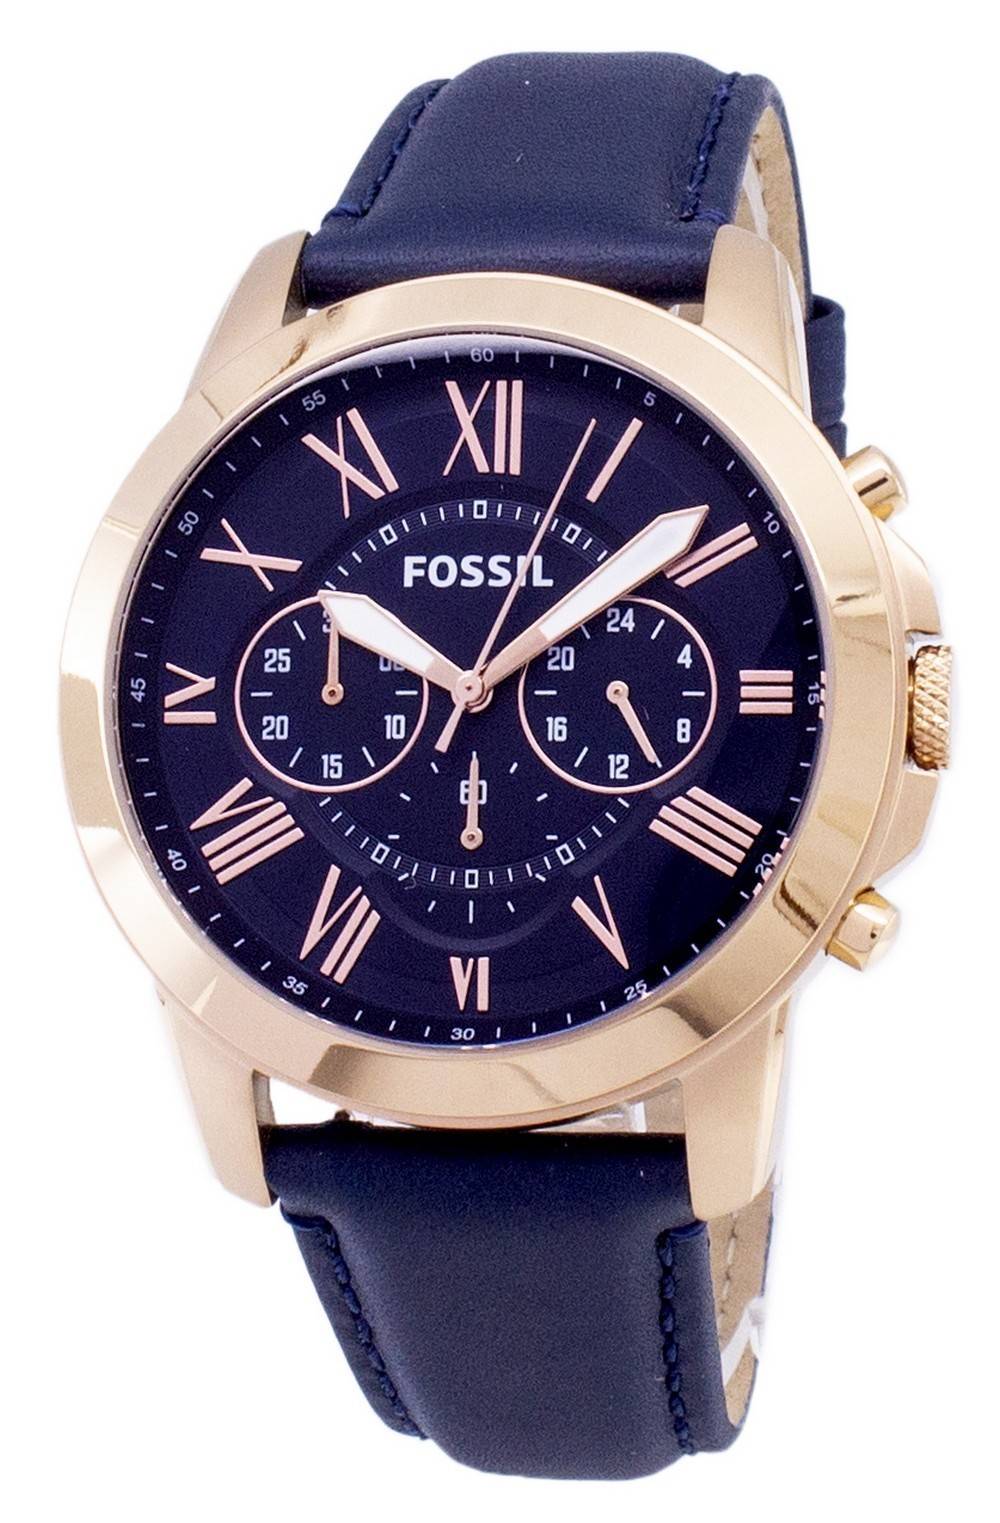 Fossil Men's Watch Black And Blue | escapeauthority.com